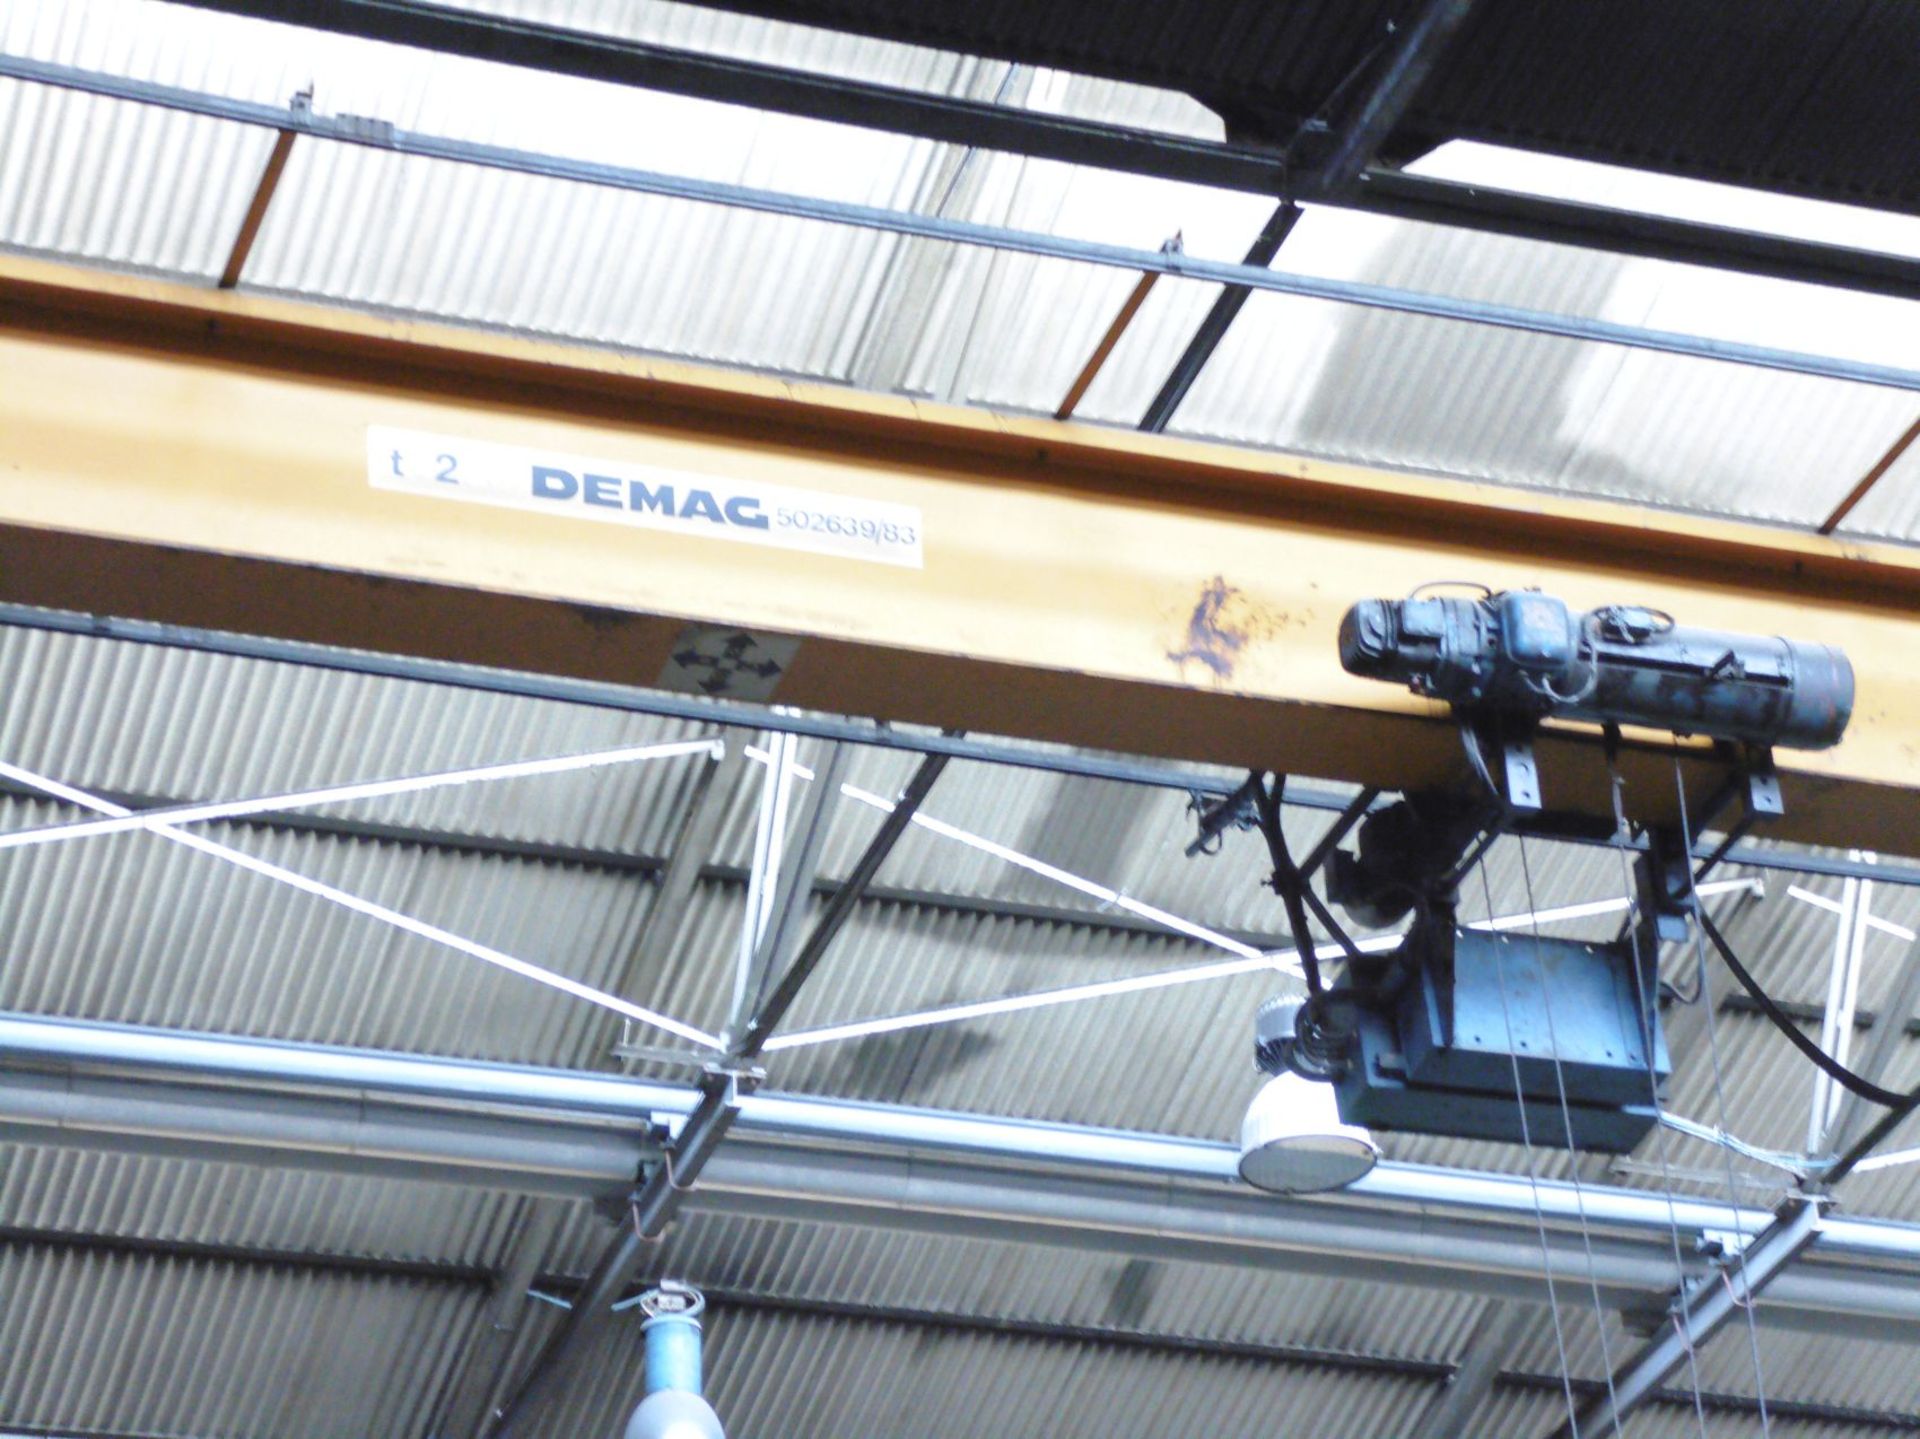 Demag 2 Tonne Single Beam Overhead Travelling Gantry Crane with Pendant Control; span 19m, No - Image 2 of 5